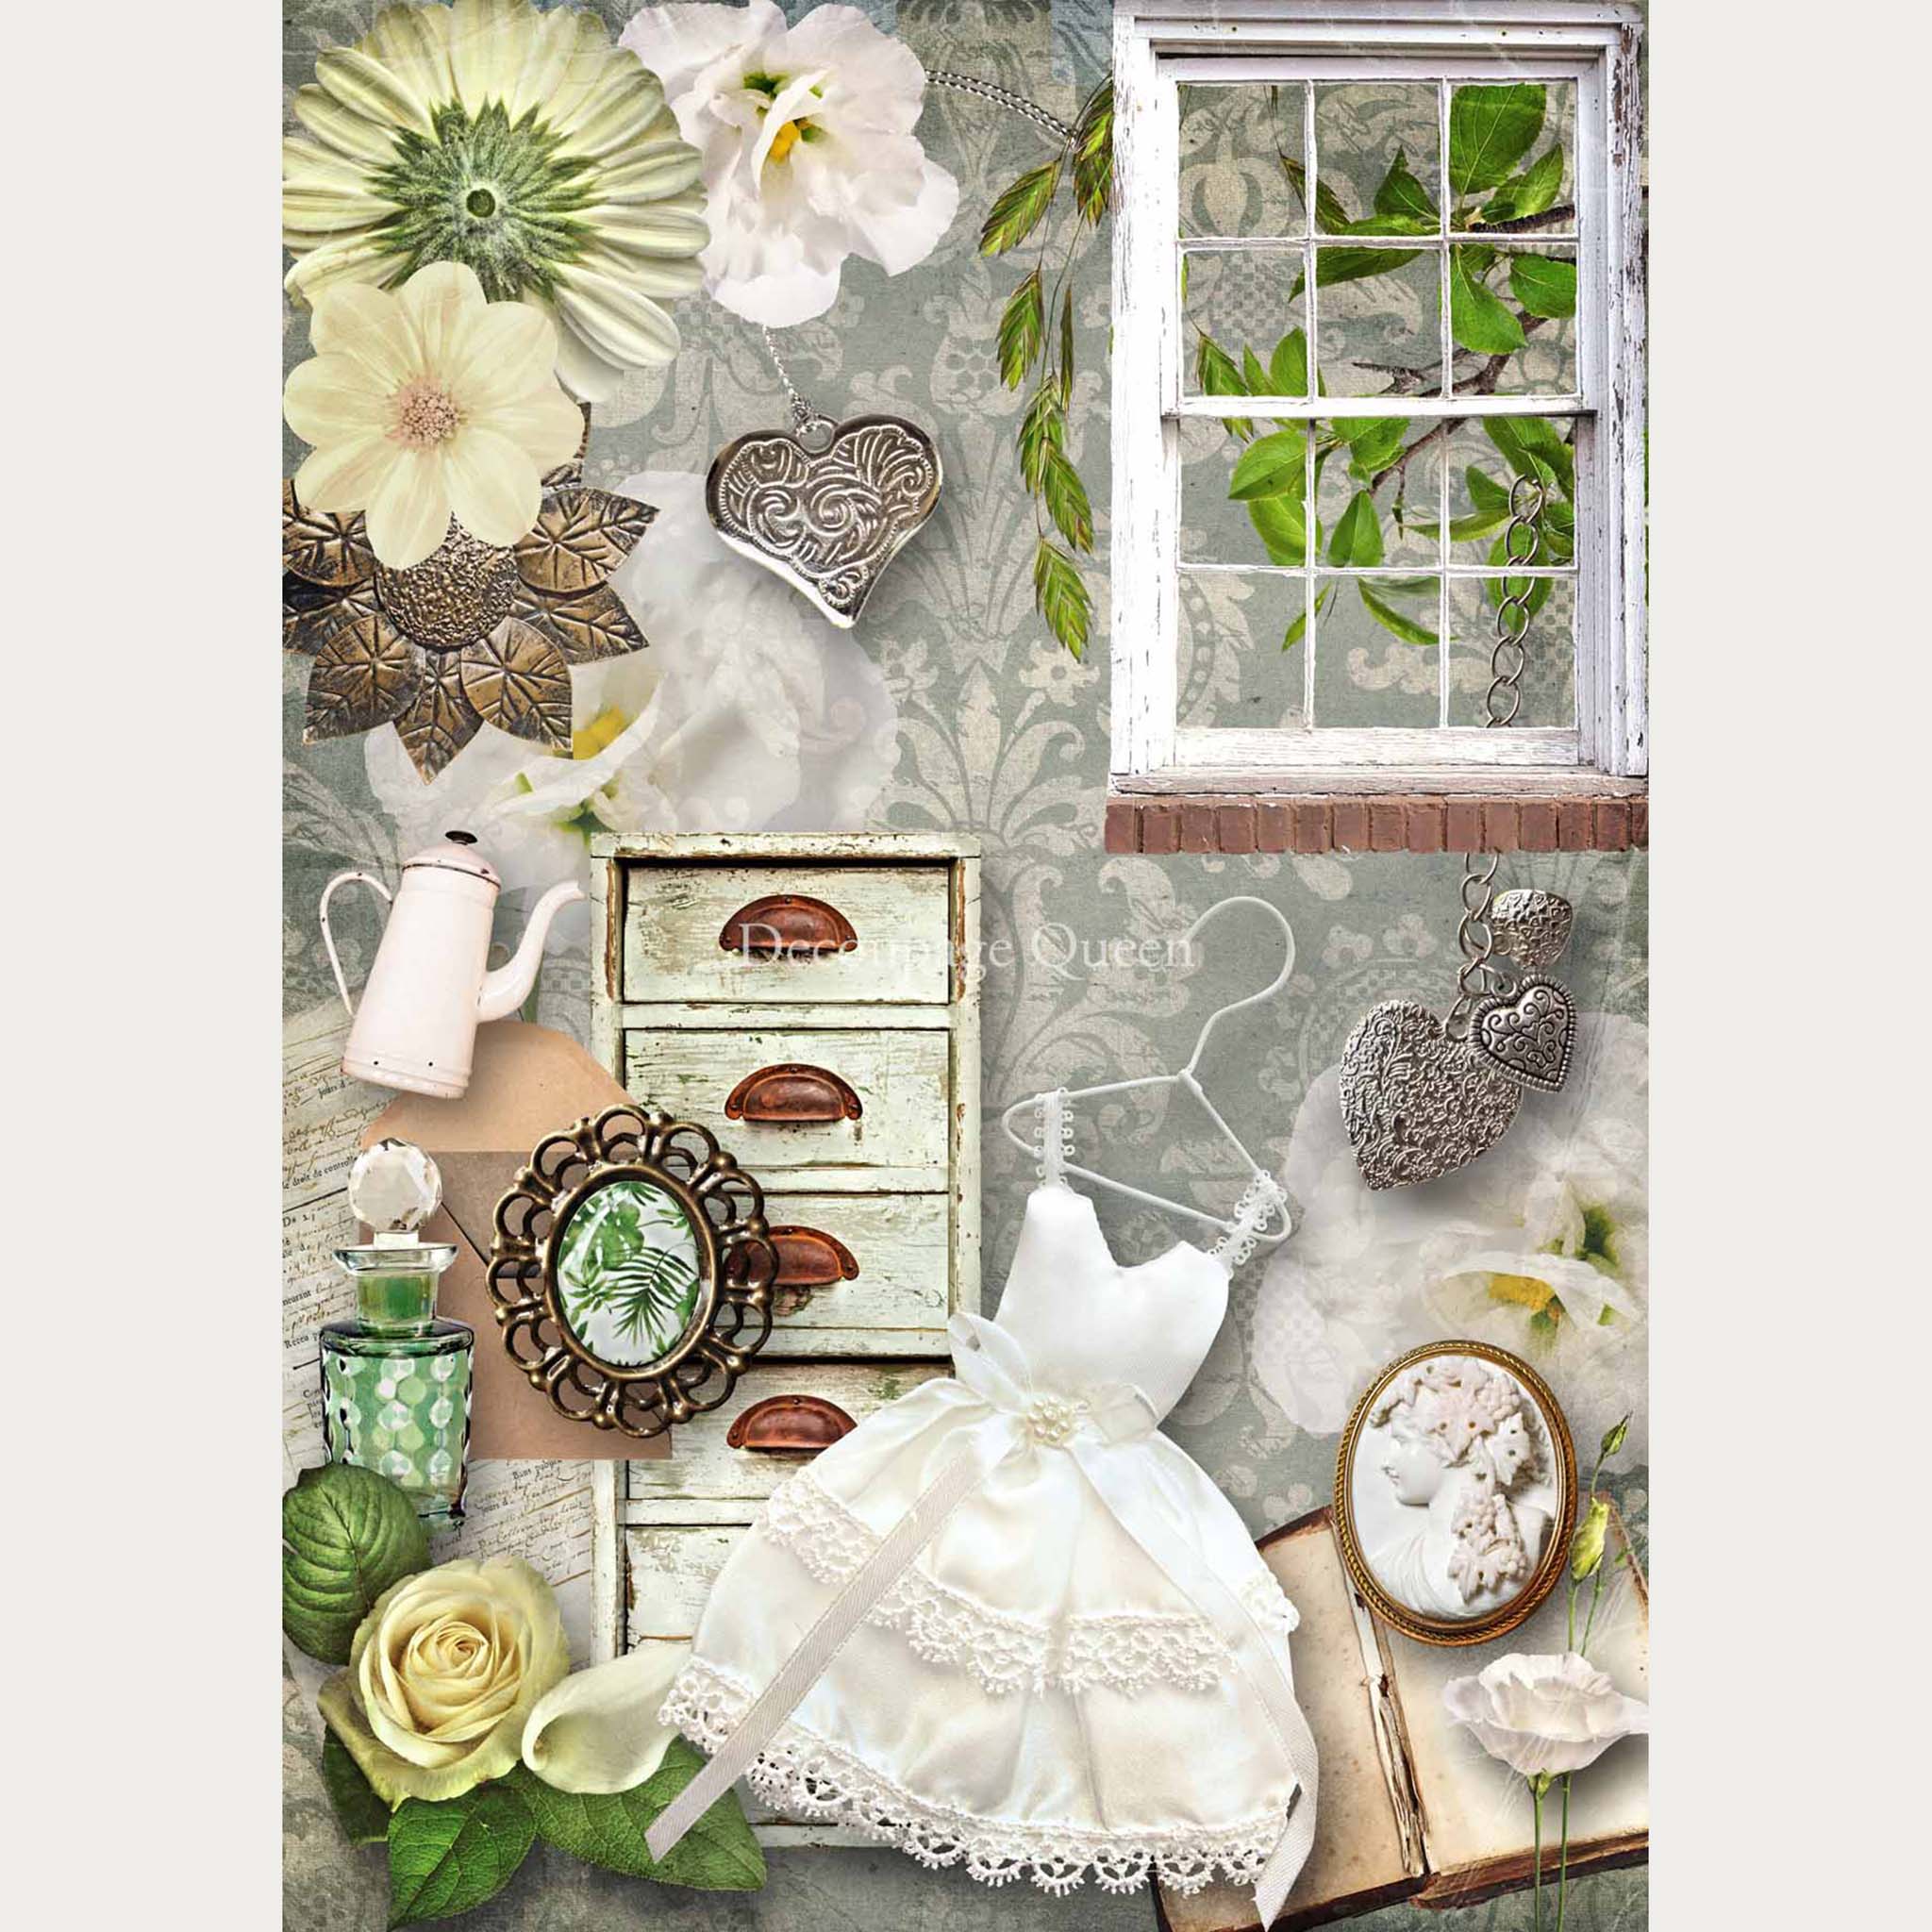 A4 rice paper design that features a collage of silver heart necklaces, a girls white dress on a hanger, a perfume bottle, a distressed vintage chest dresser, a white 12 pane vintage window, and white flowers against a damask wallpaper. White borders are on the sides.